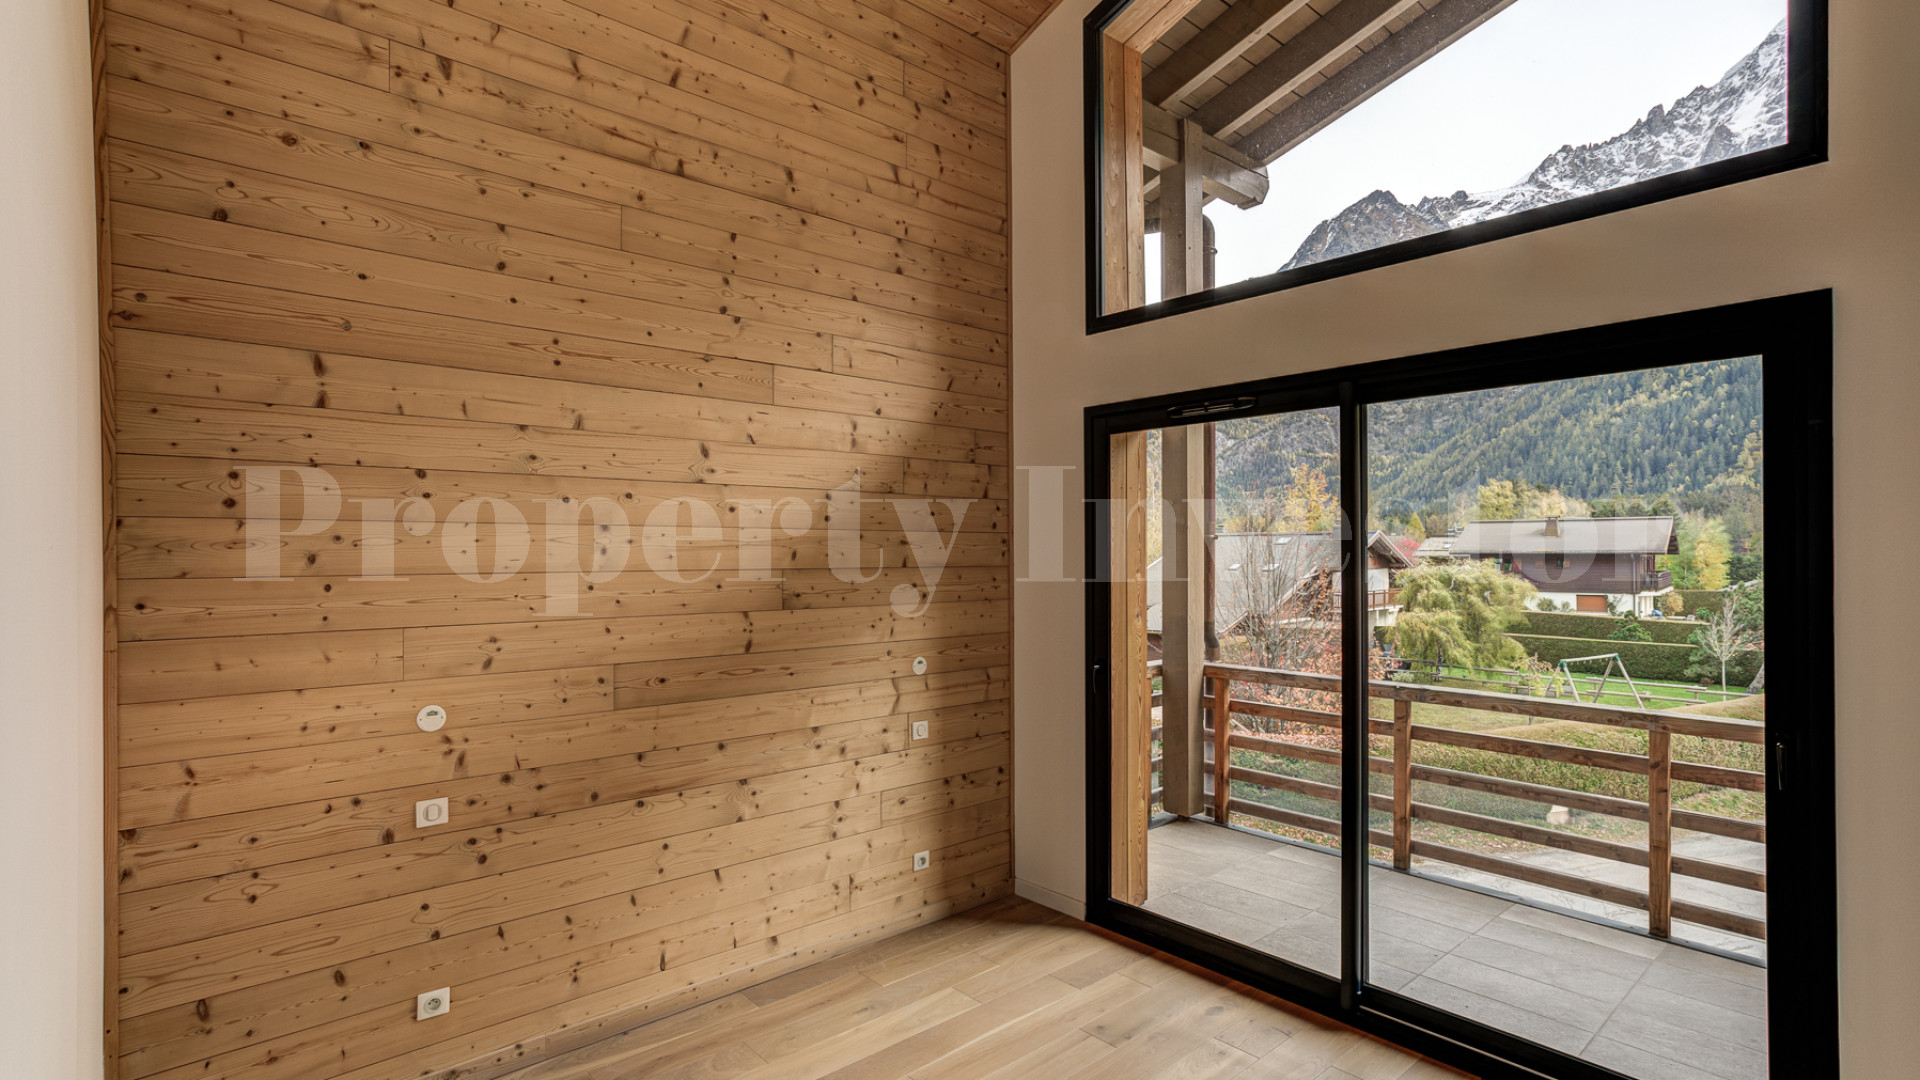 Beautiful 4 Bedroom Luxury Apartment with Mountain Views for Sale in Chamonix-Mont-Blanc, France